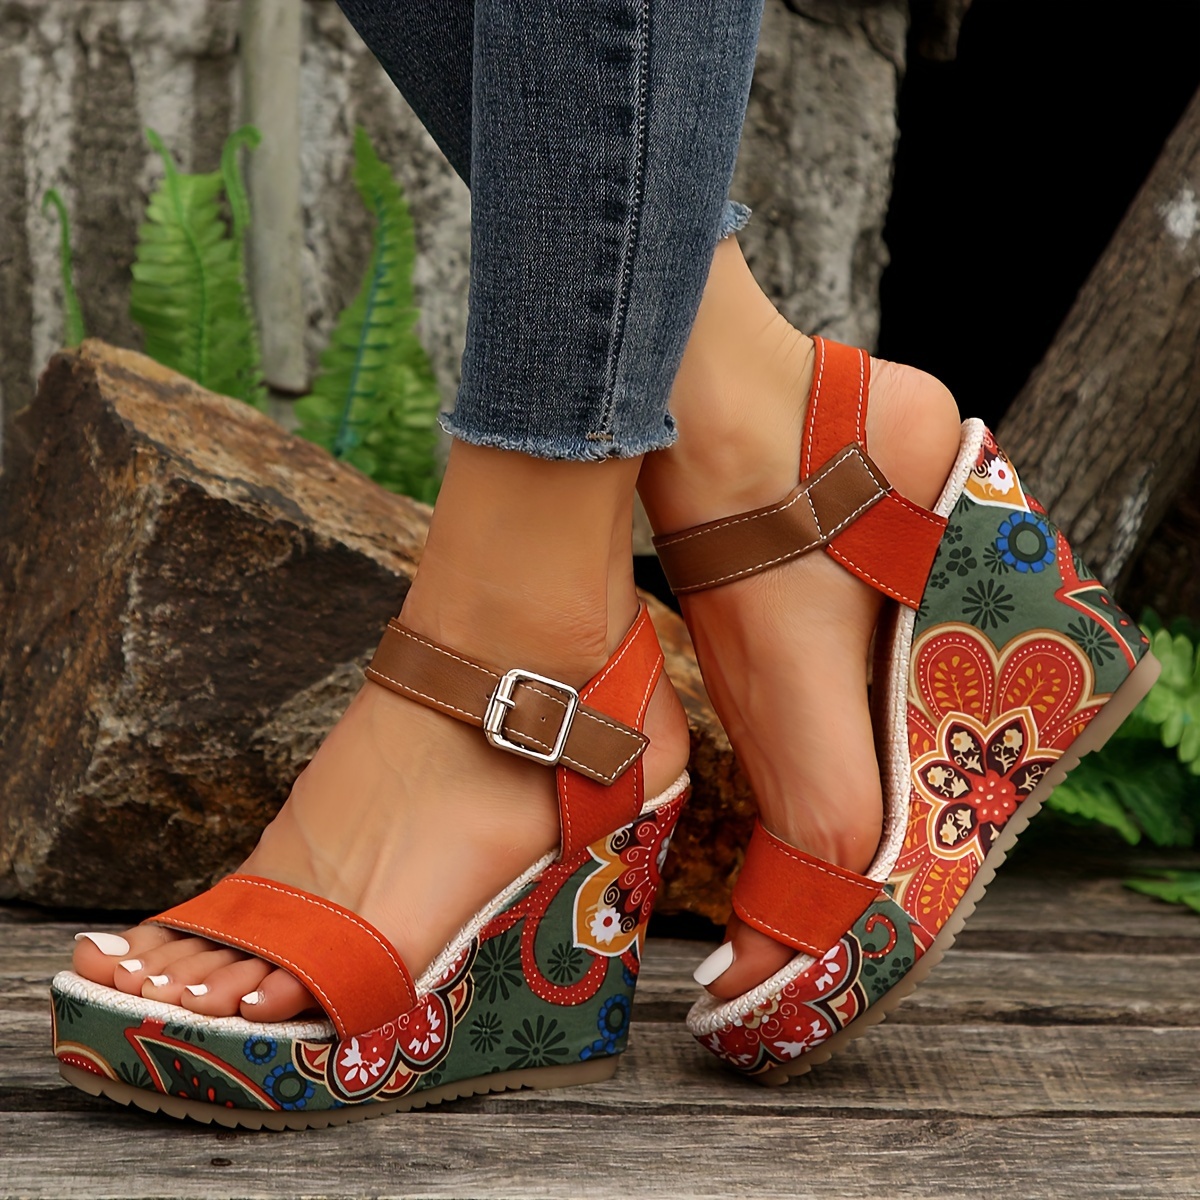 FLORAL PRINTED WEDGES HEELS SANDALS PRETTIEST DESIGNS FOR GIRLS AND WOME